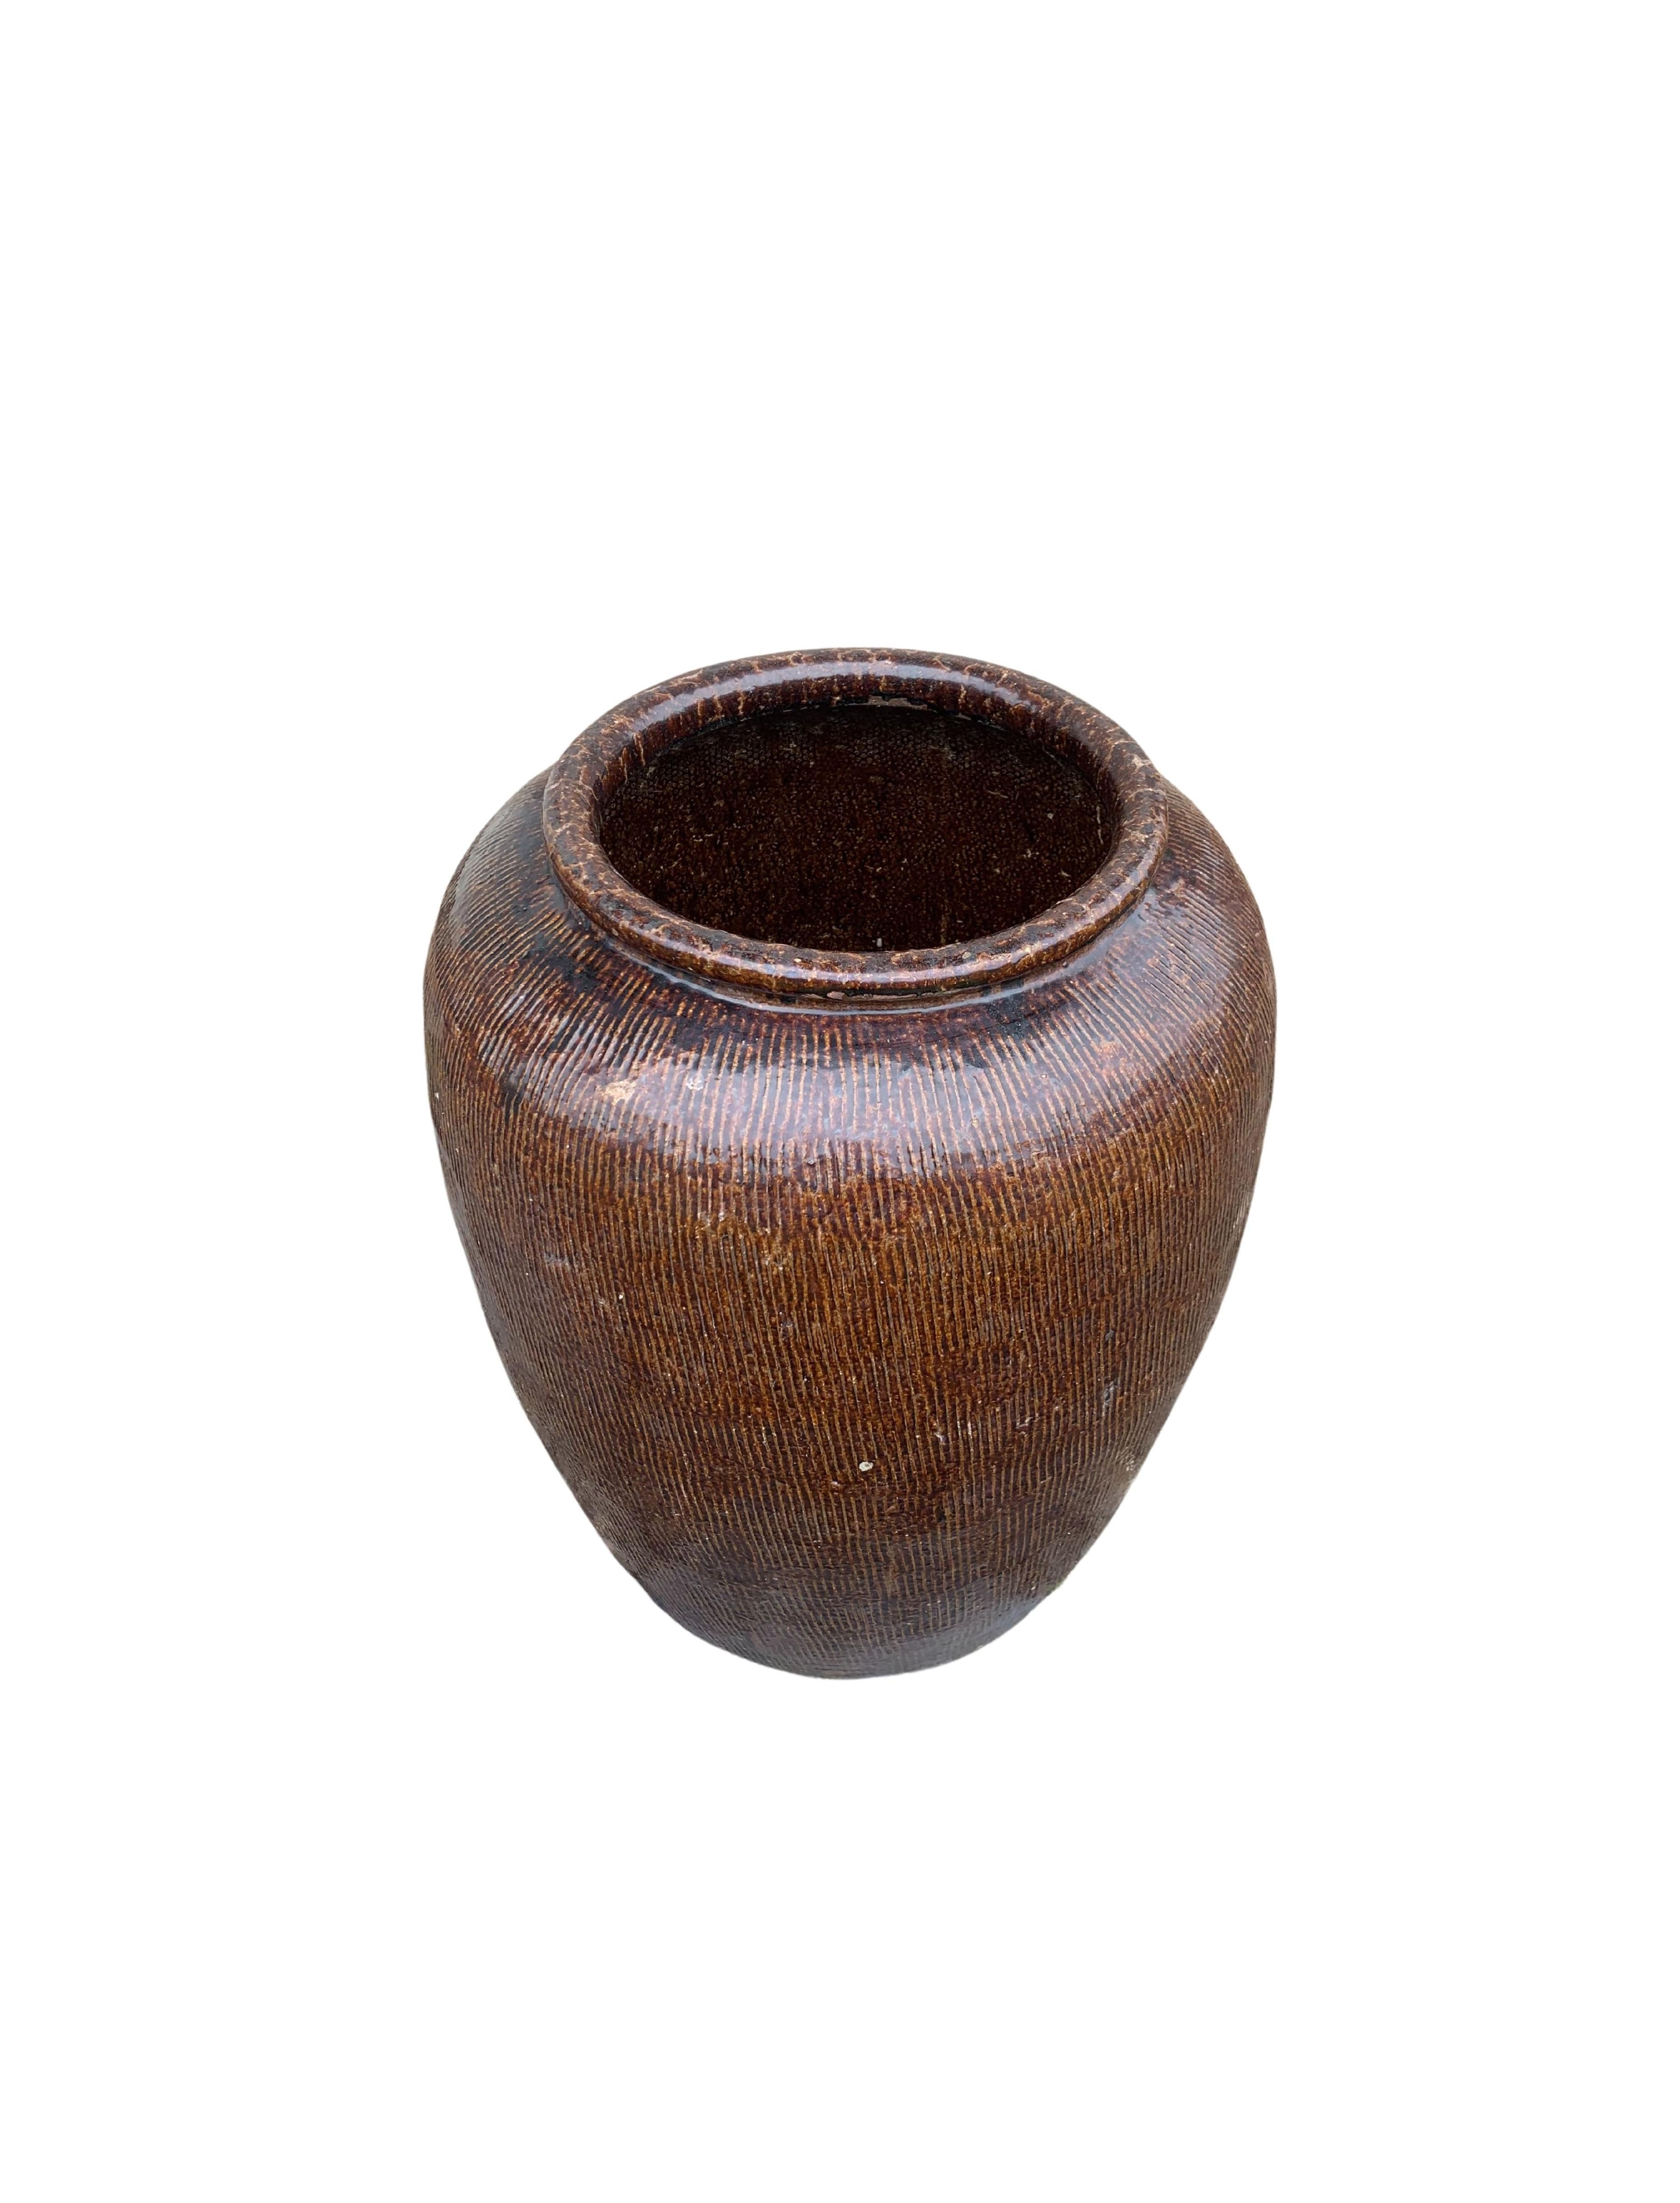 This glazed Chinese ceramic jar from the turn of the 19th century was once used for soy sauce production. It features a brown finish and outer surface that features a ribbed texture. A great example of Chinese pottery, with its imperfections and